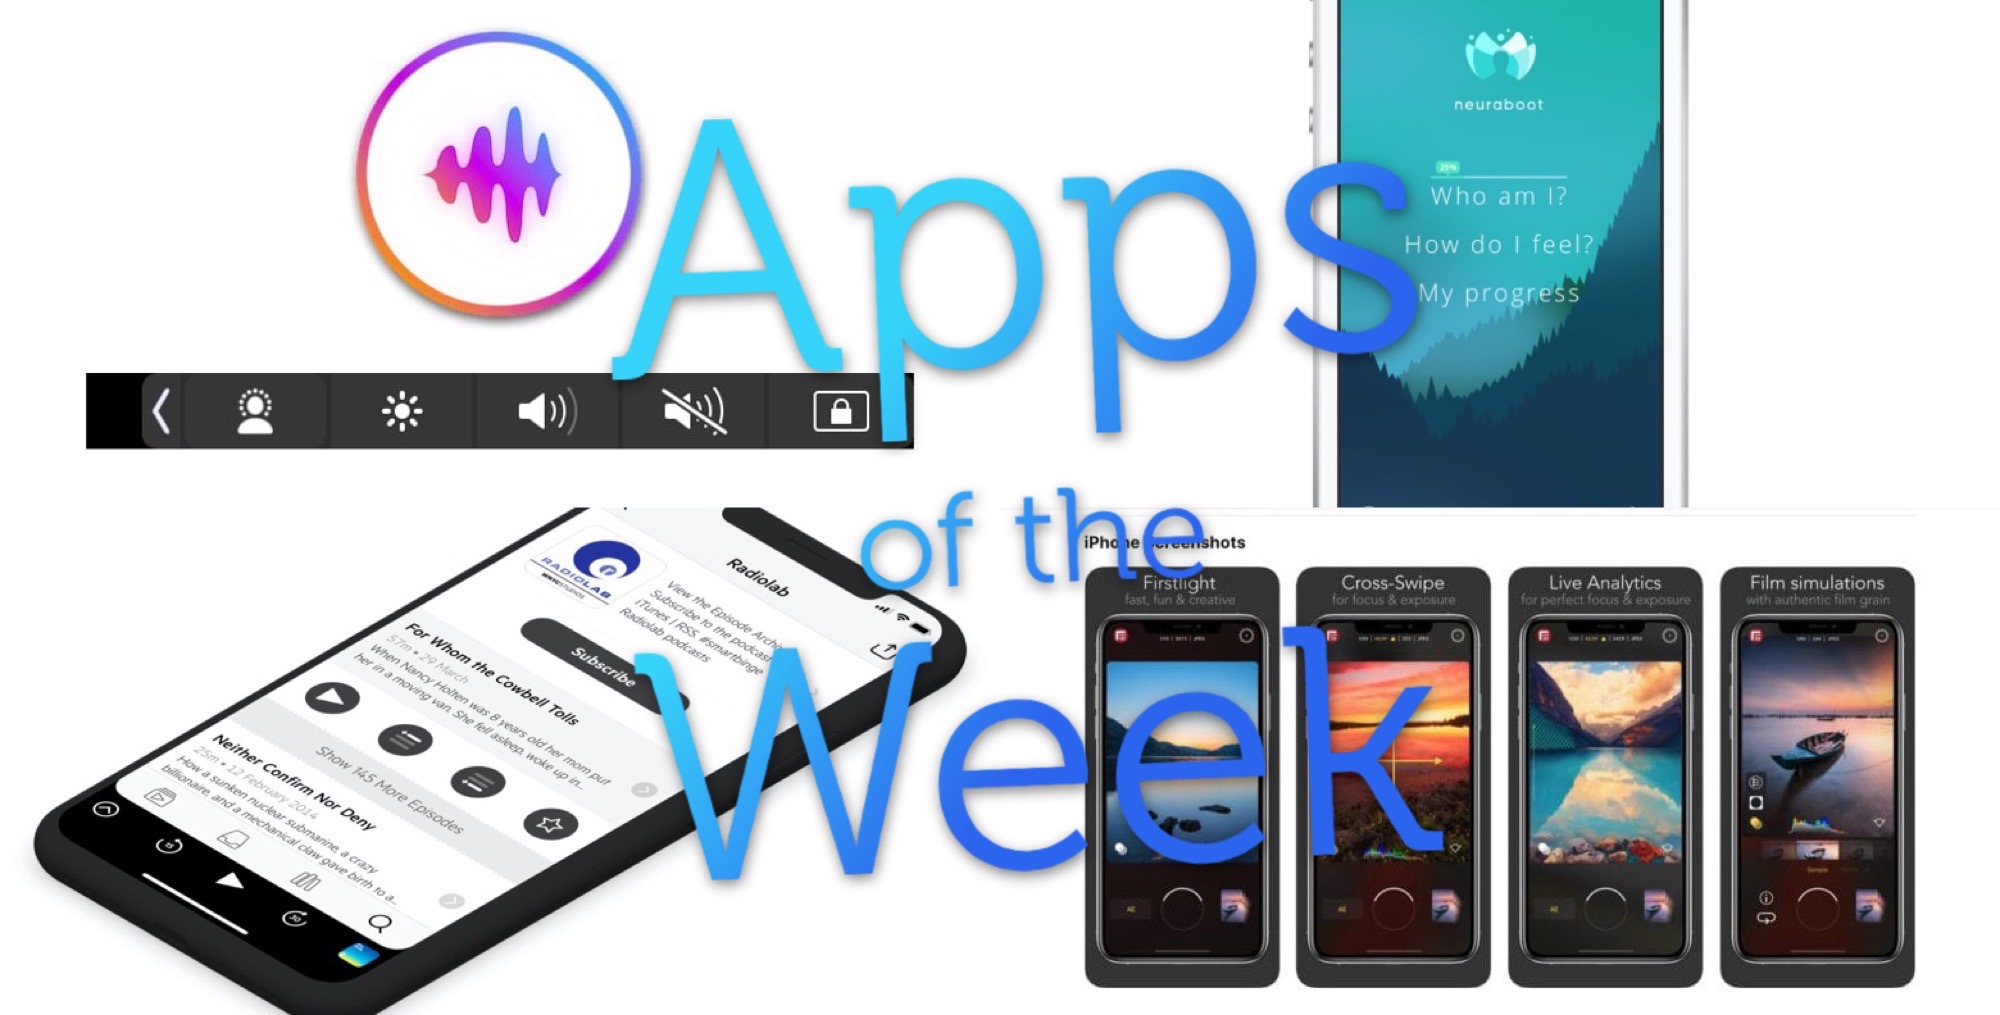 Download this week's top apps, pronto!